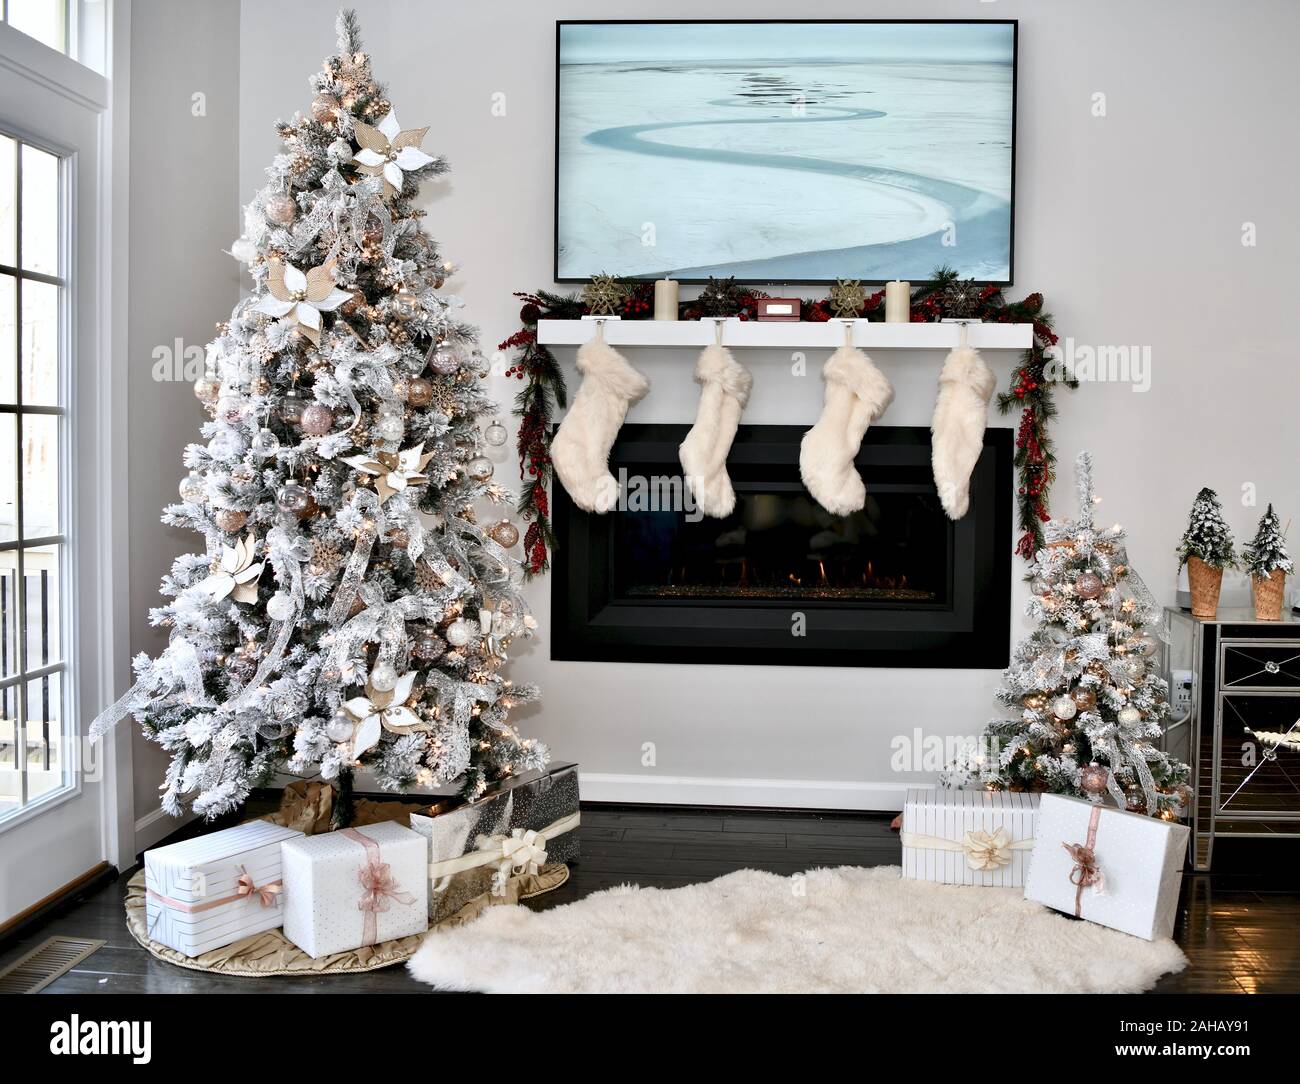 Home interior decorated for Christmas and the holidays Stock Photo